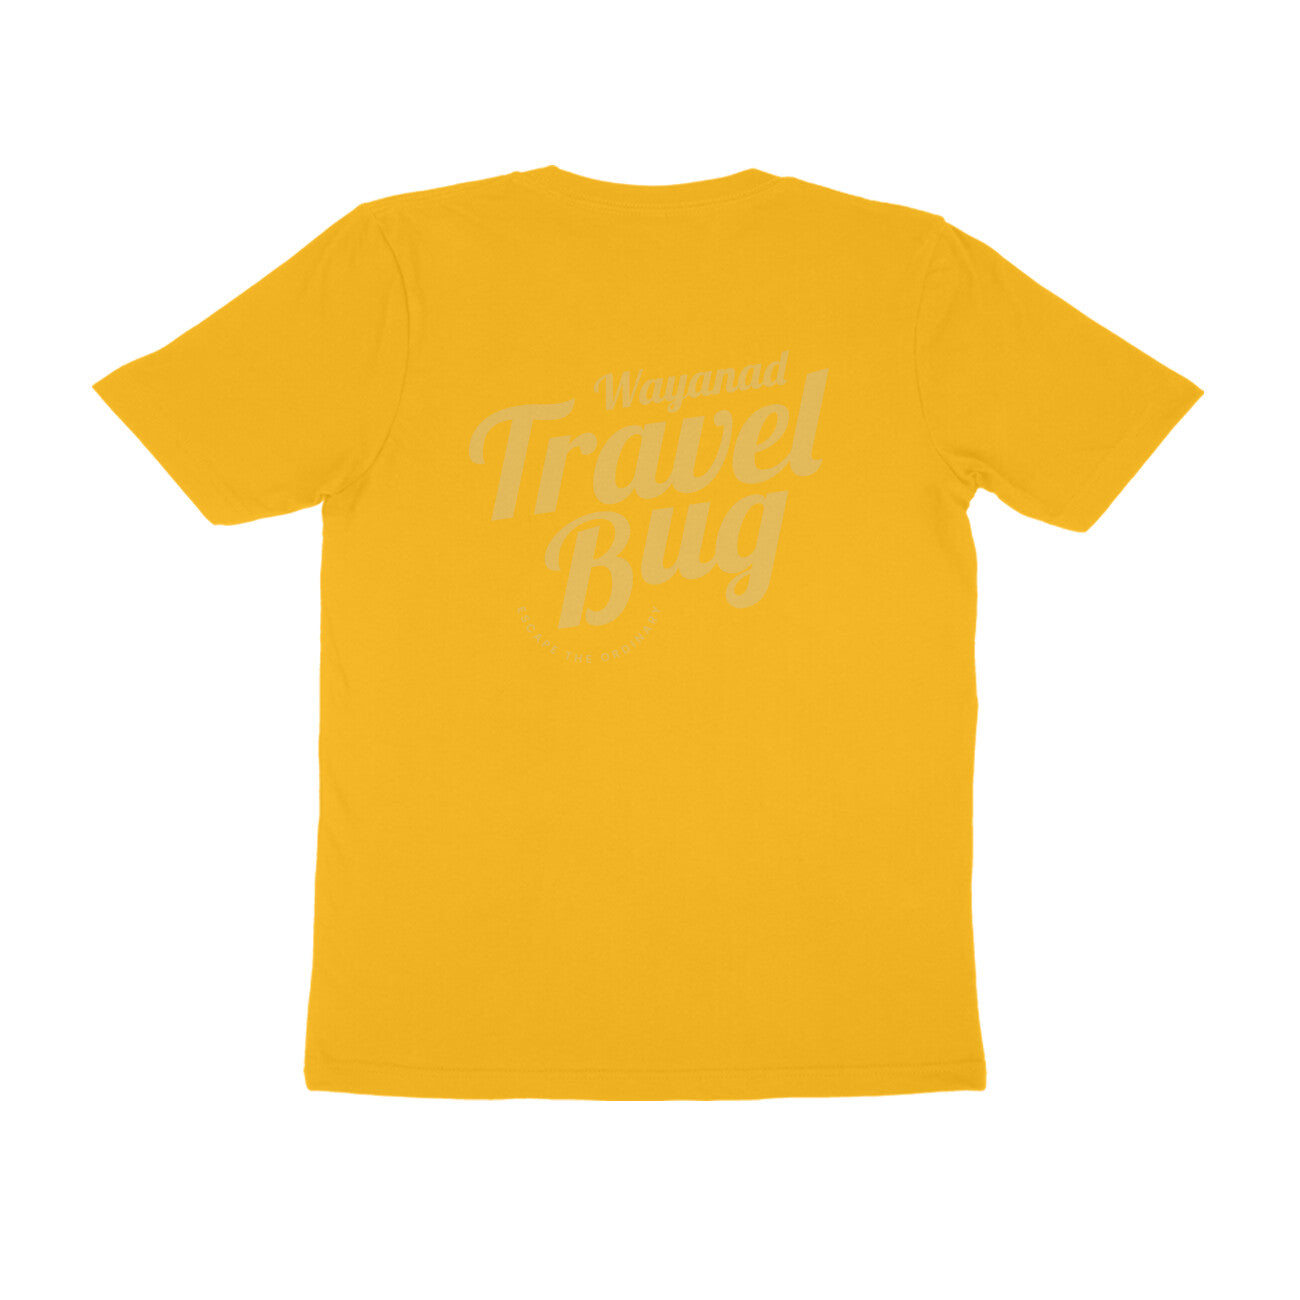 TRAVEL BUG FRONT AND BACK PRINT - All Colors S to 2XL